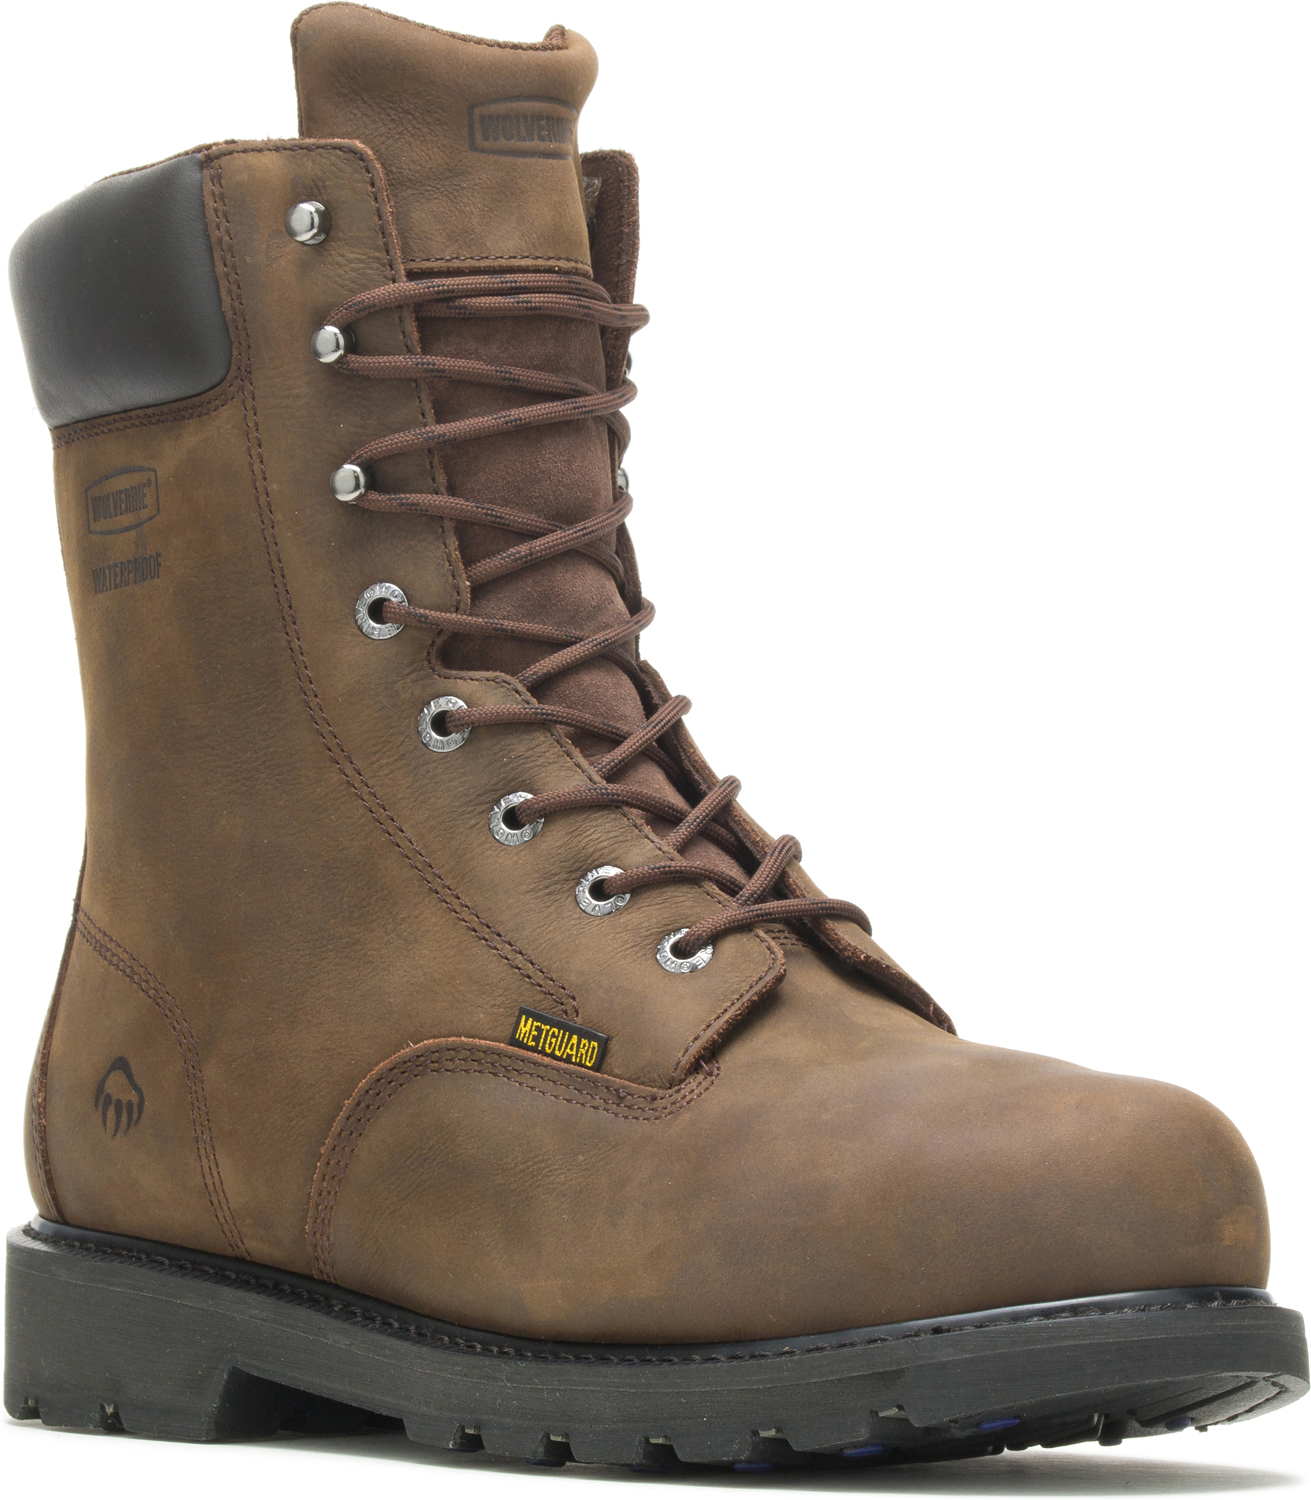 BROWN COLOR Details about   WOLVERINE MEN'S CLINT WATERPROOF STEEL TOE WORK BOOT SIZE 13M 8 